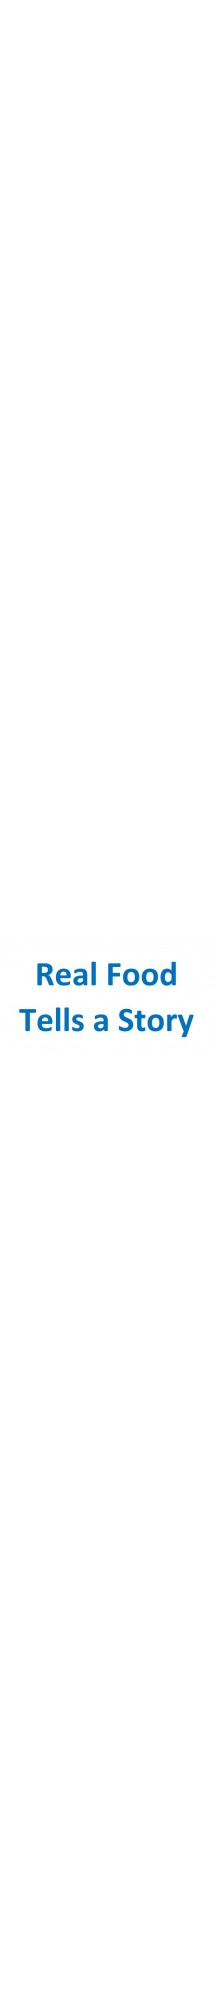 Real Food Tells a Story